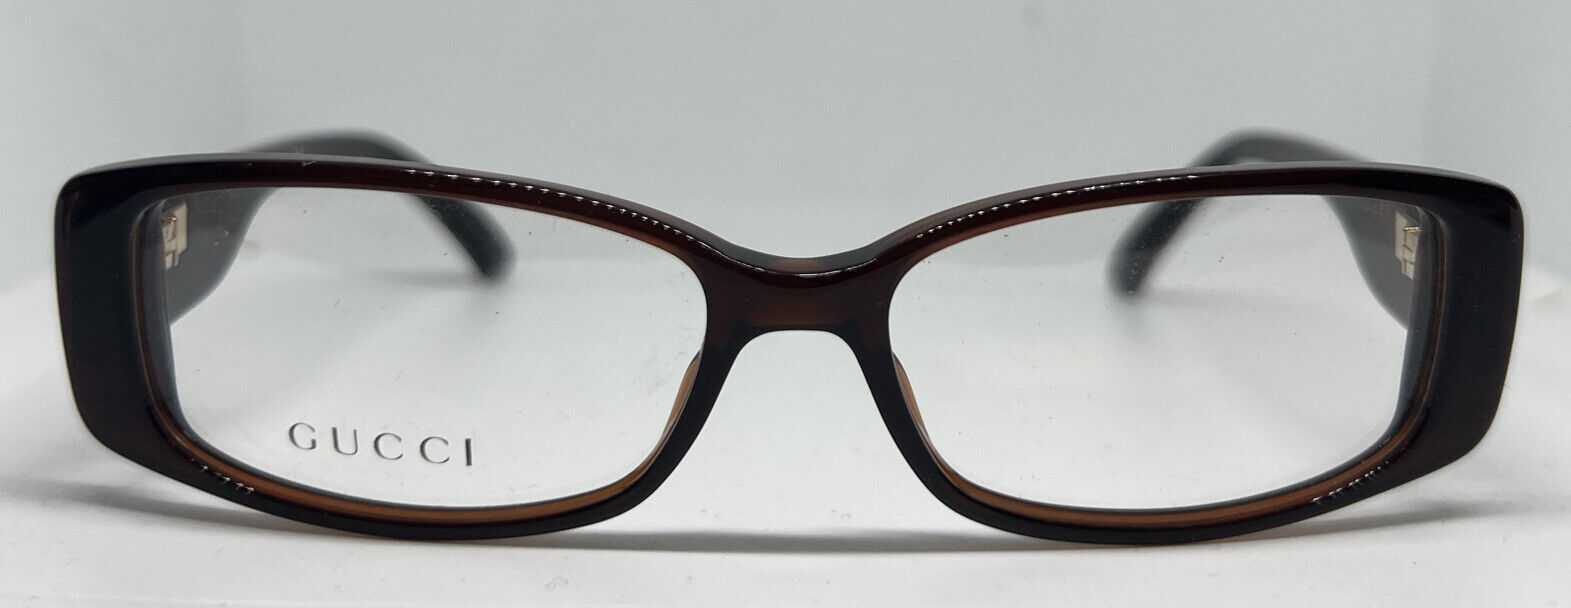 Primary image for NEW Authentic Gucci Women`s Eyeglasses GG3050/N 20E Gucci Logo Frame